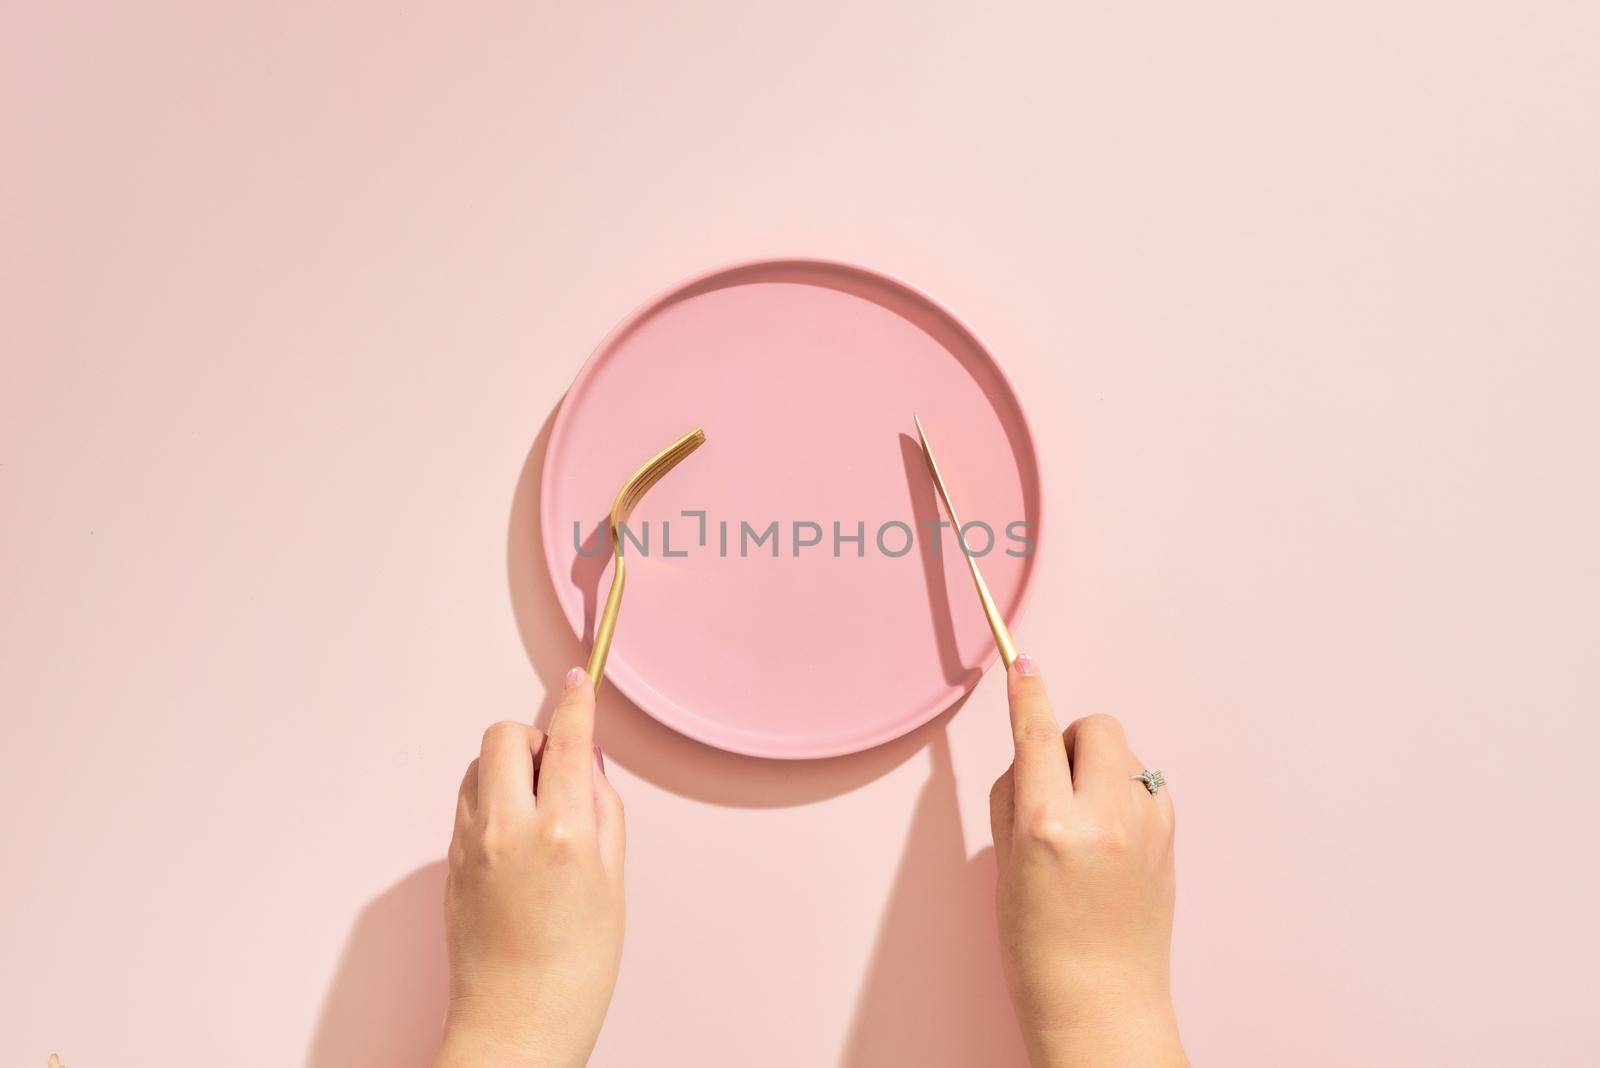 Hands hold a fork and knife over plate on pink background by makidotvn